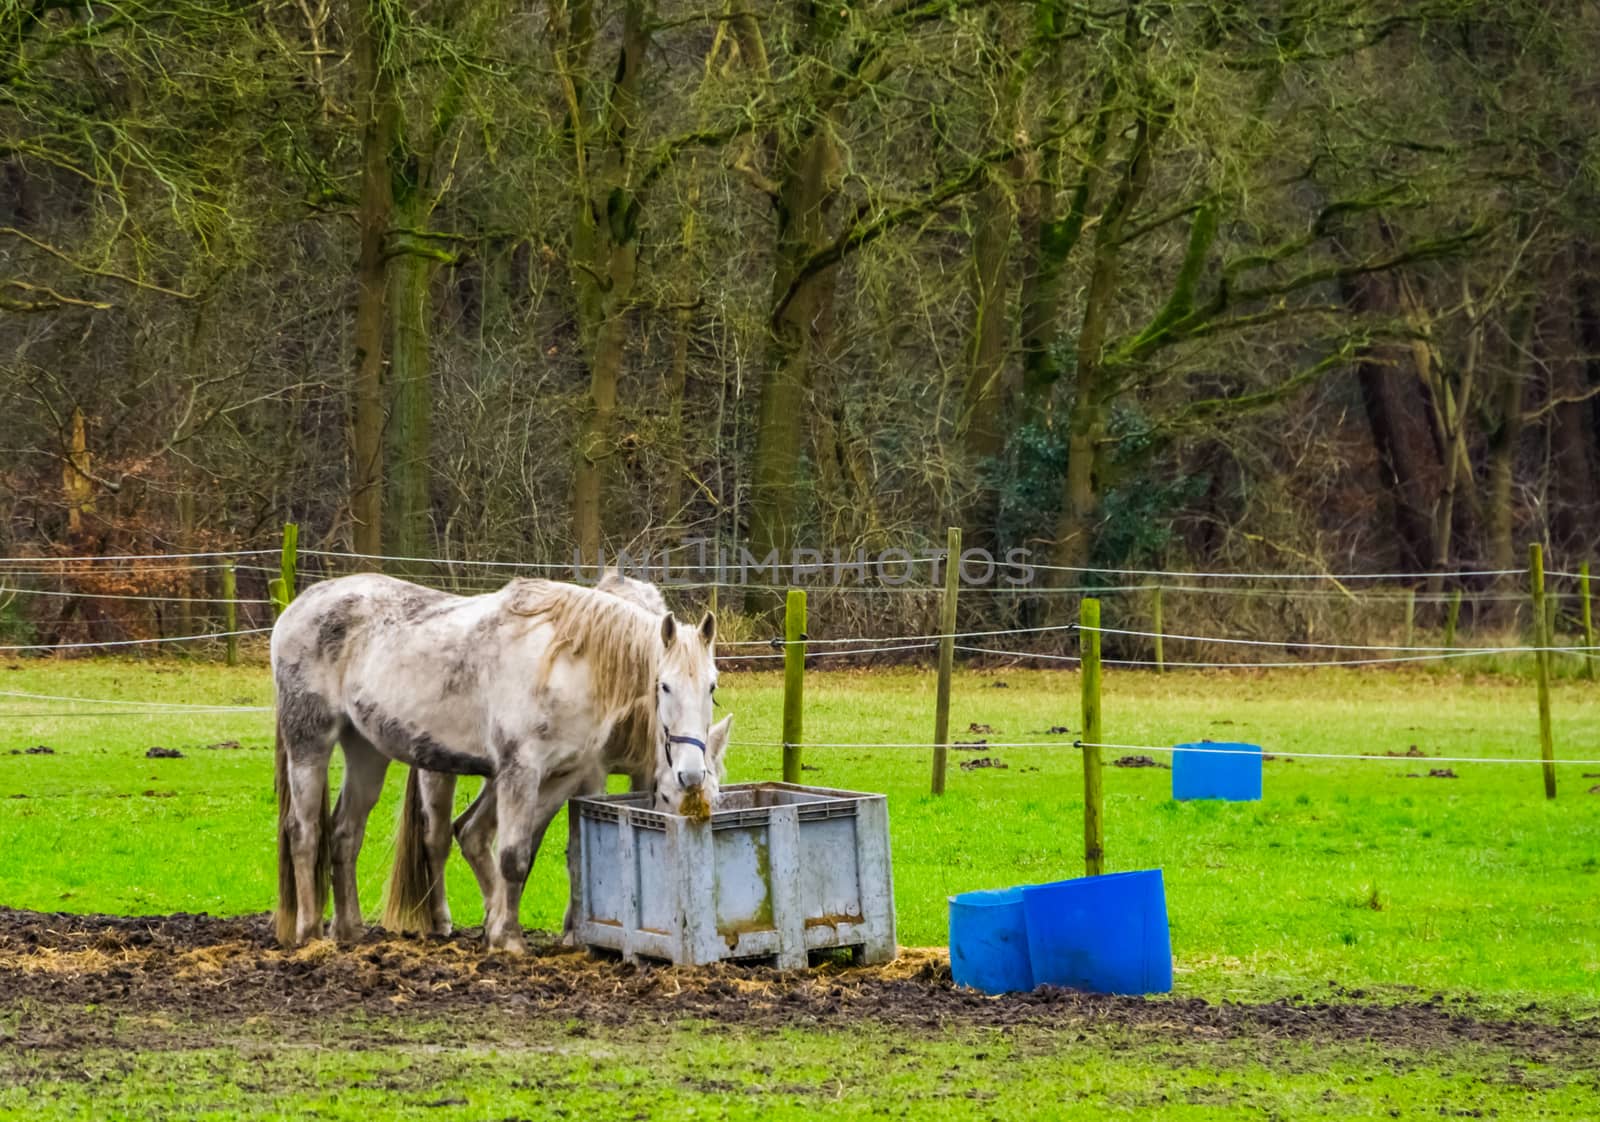 white horse couple eating hay out of basket together in the pasture, pet and animal care